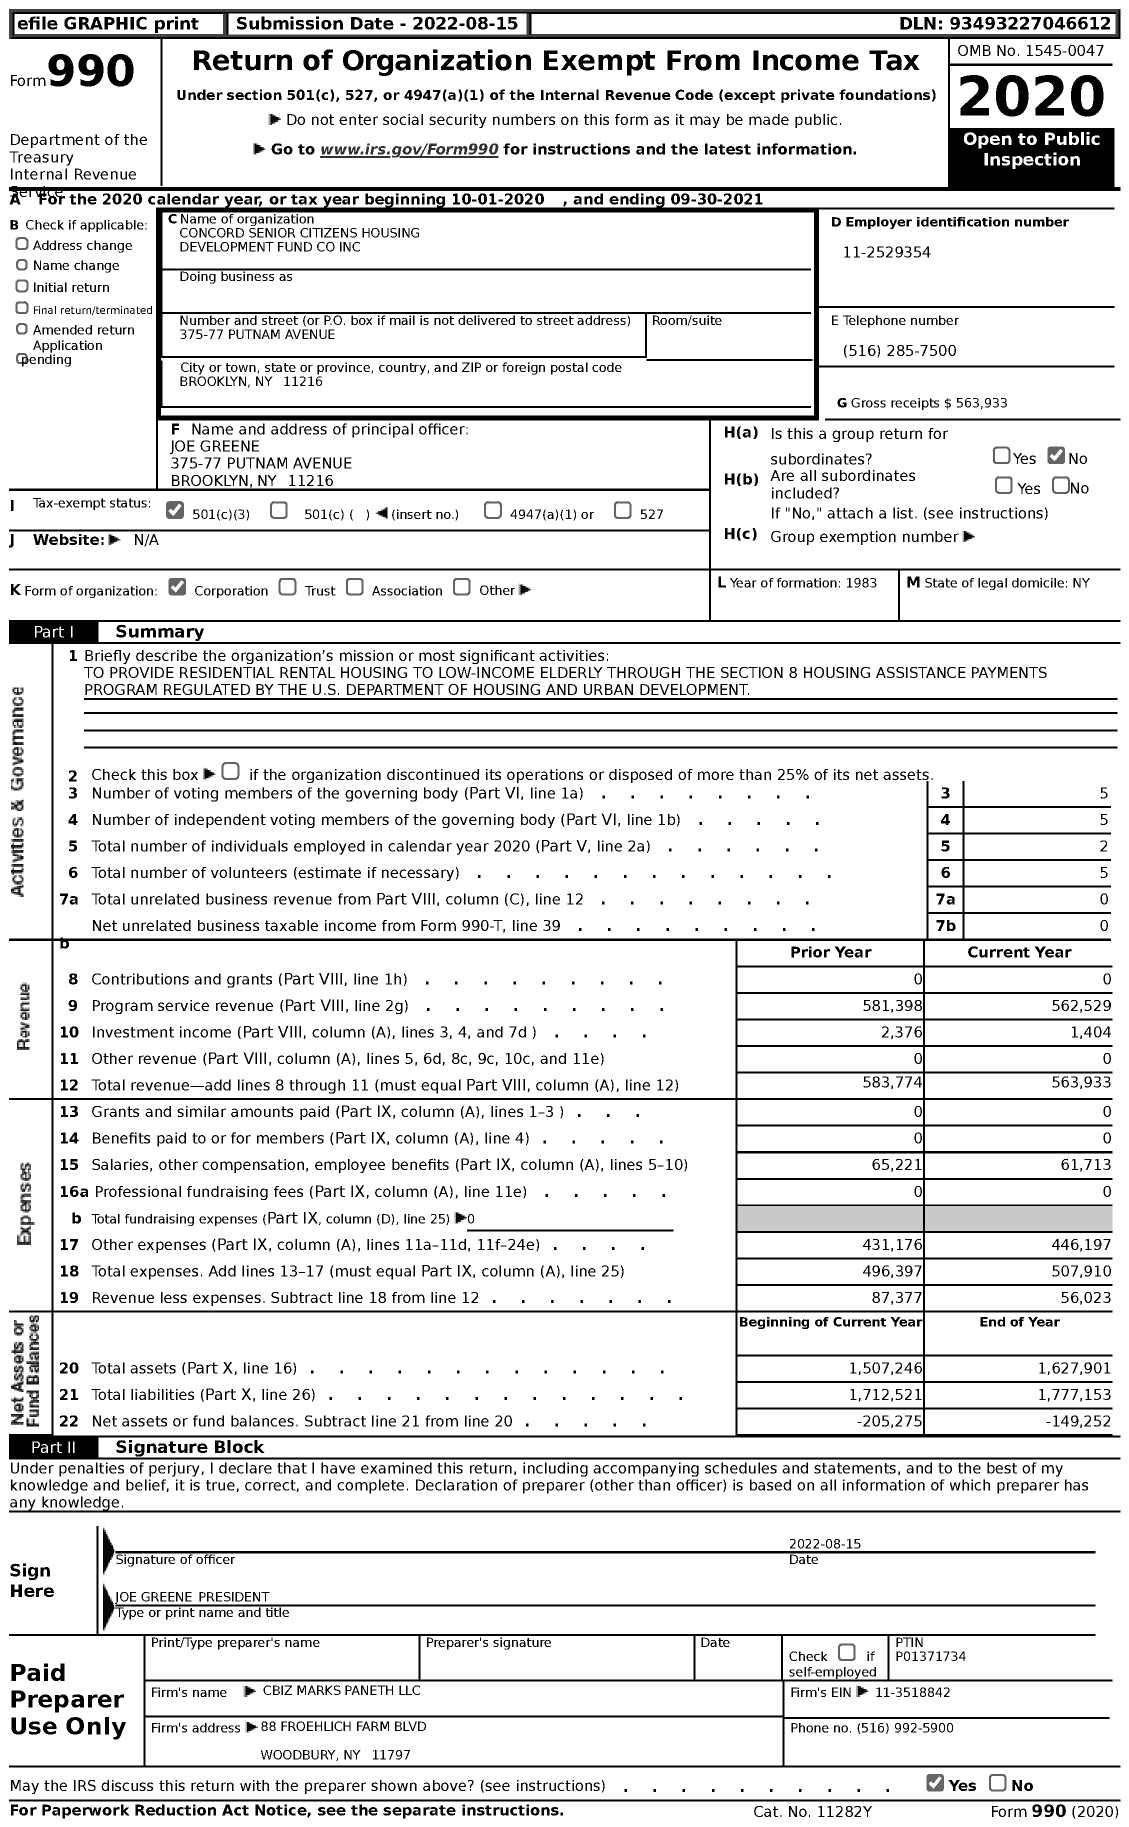 Image of first page of 2020 Form 990 for Concord Senior Citizens Housing Development Fund